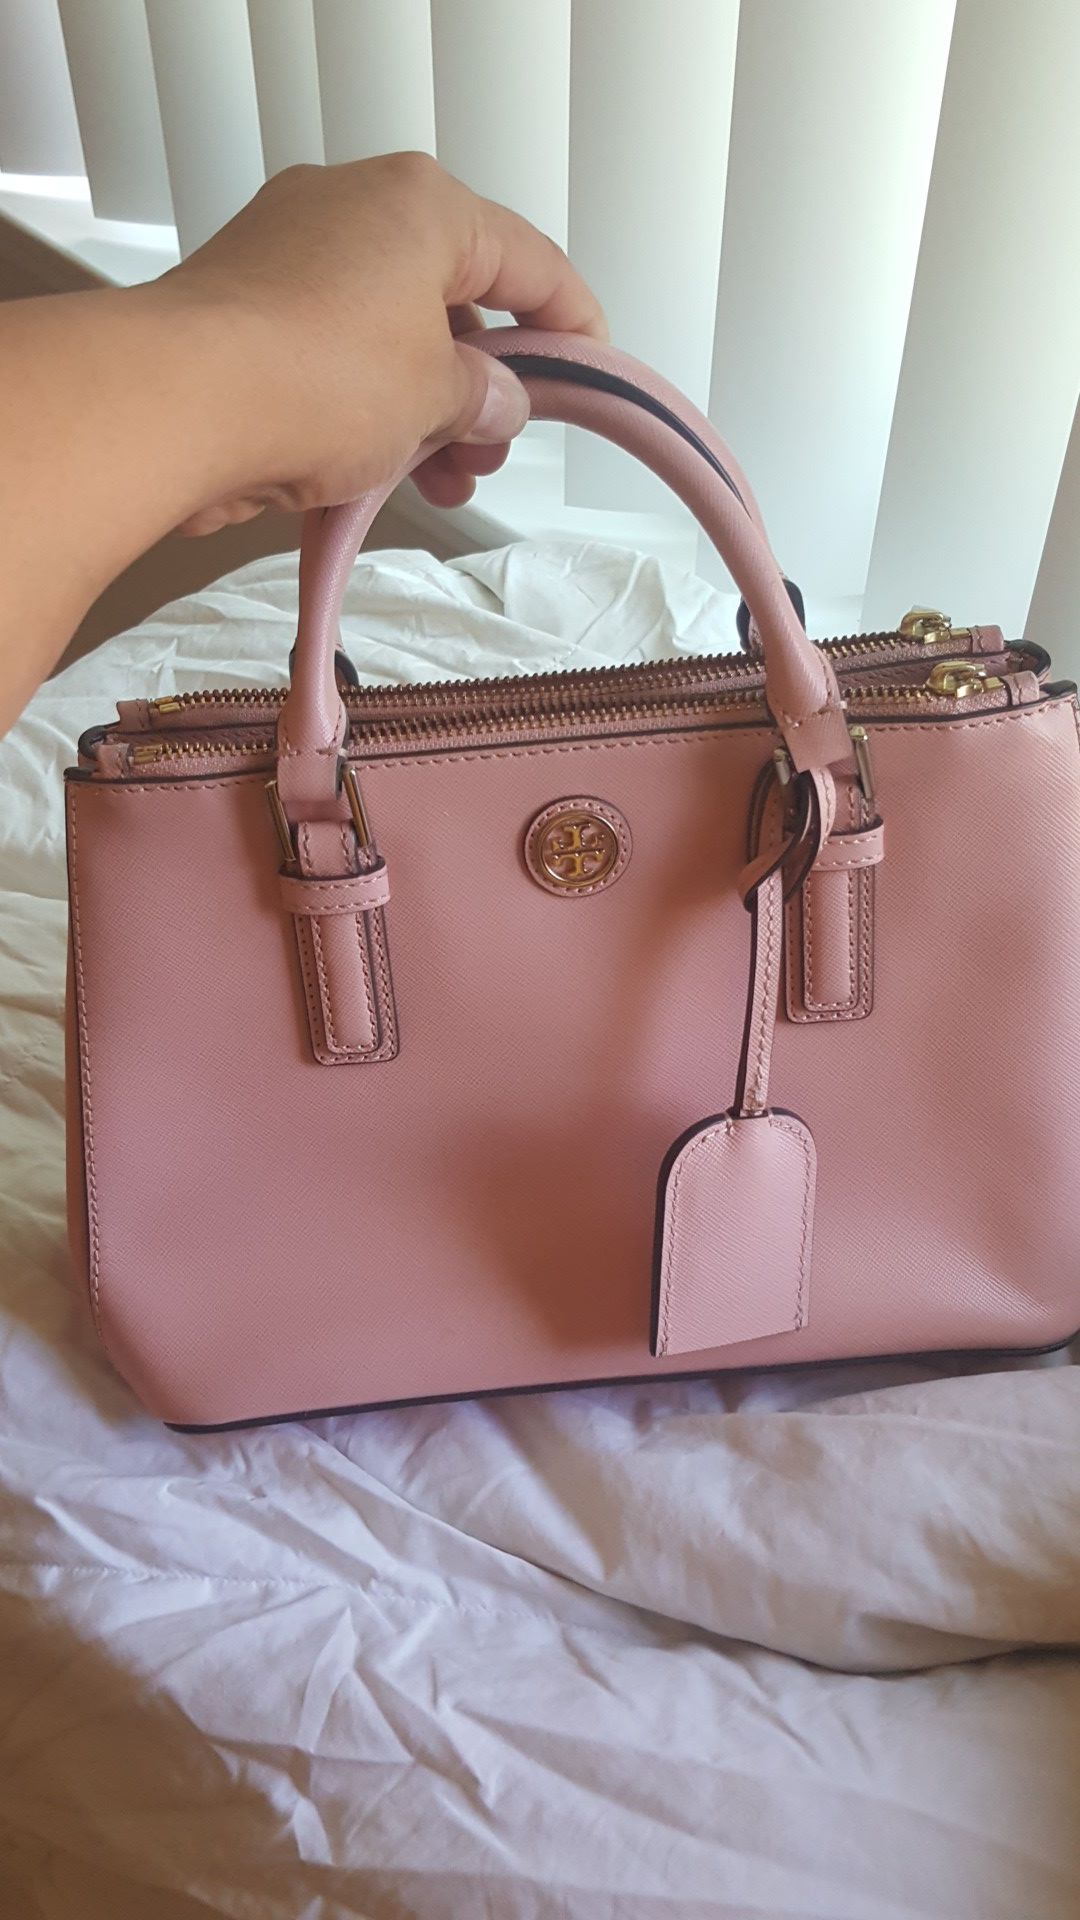 Authentic Tory Burch York Buckle Tote - Red for Sale in Orange, CA - OfferUp